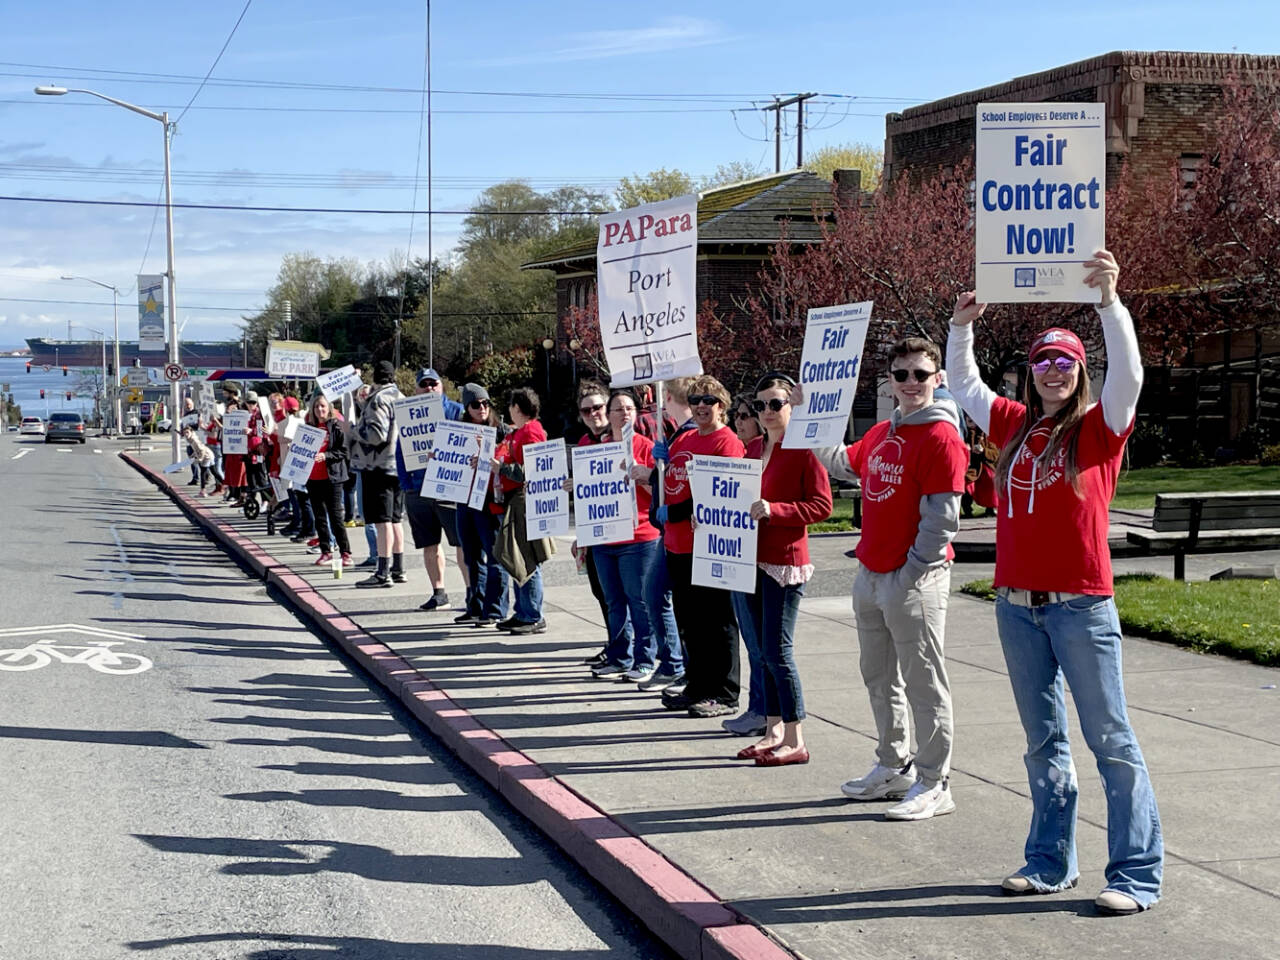 Members of the Port Angeles Paraeducators Association gather on Lincoln Street on Sunday morning, a day before a planned strike if an agreement cannot be reached with the Port Angeles School District over a new contract. (Paula Hunt/Peninsula Daily News)